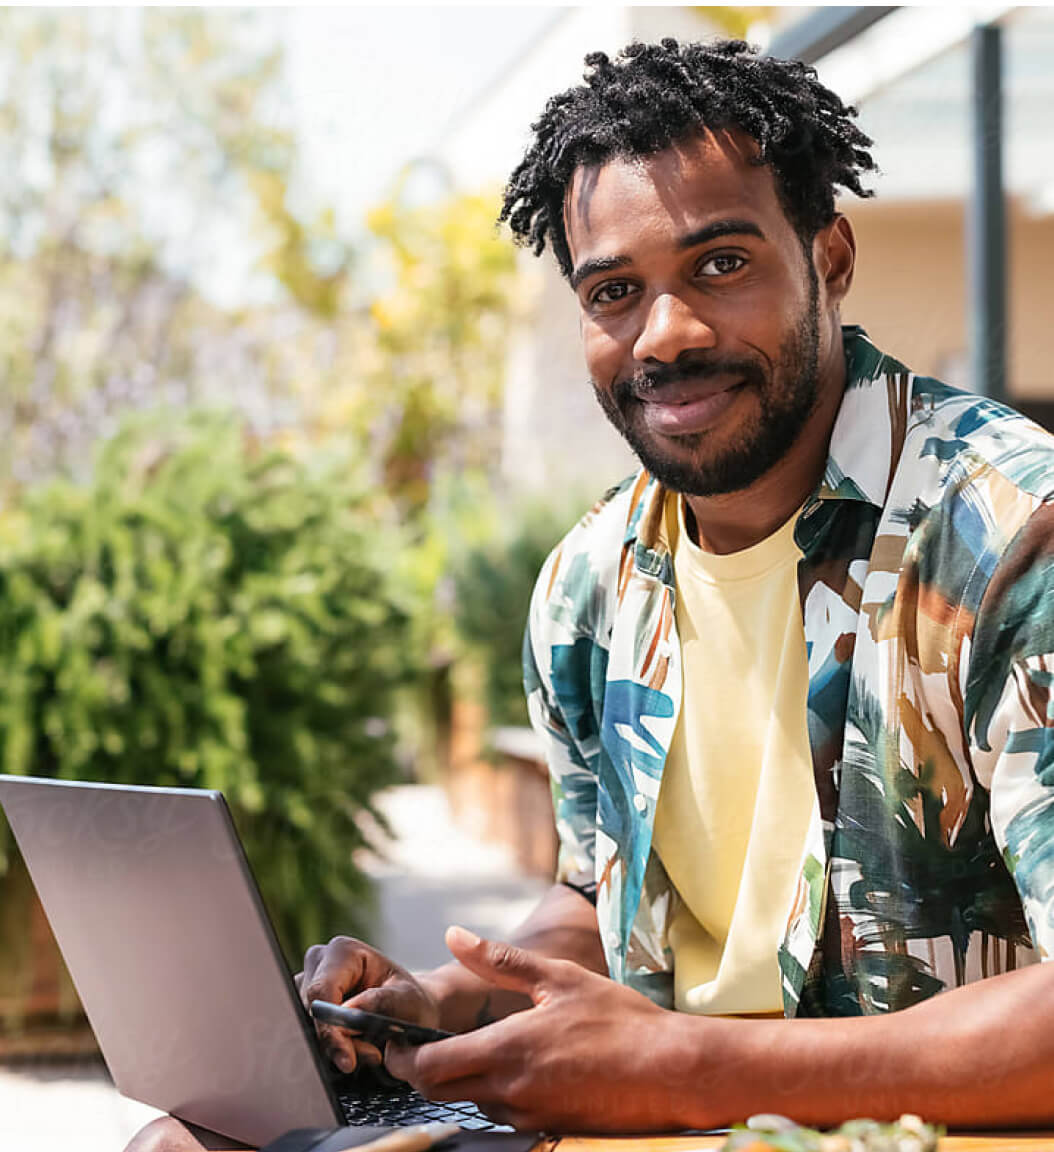 Smiling black man with beard and mustache sits outside with laptop and phone.